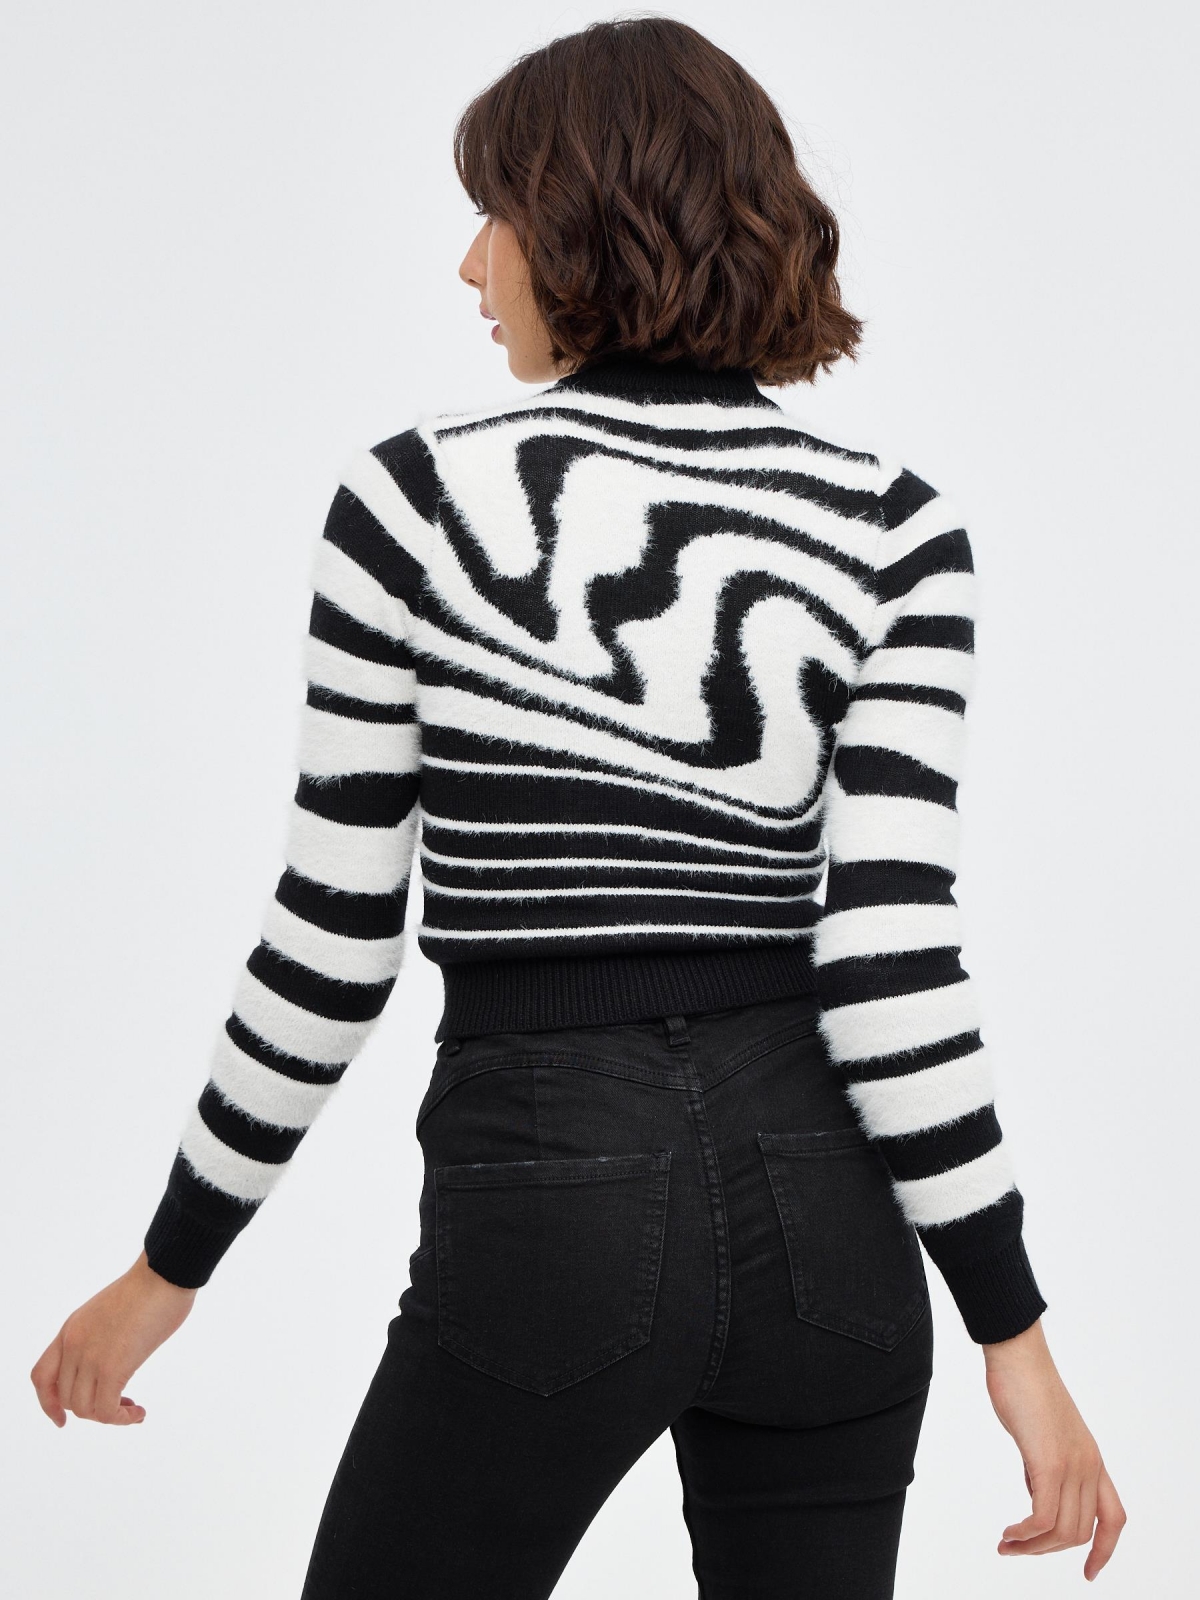 Psychedelic jacquard sweater white middle back view